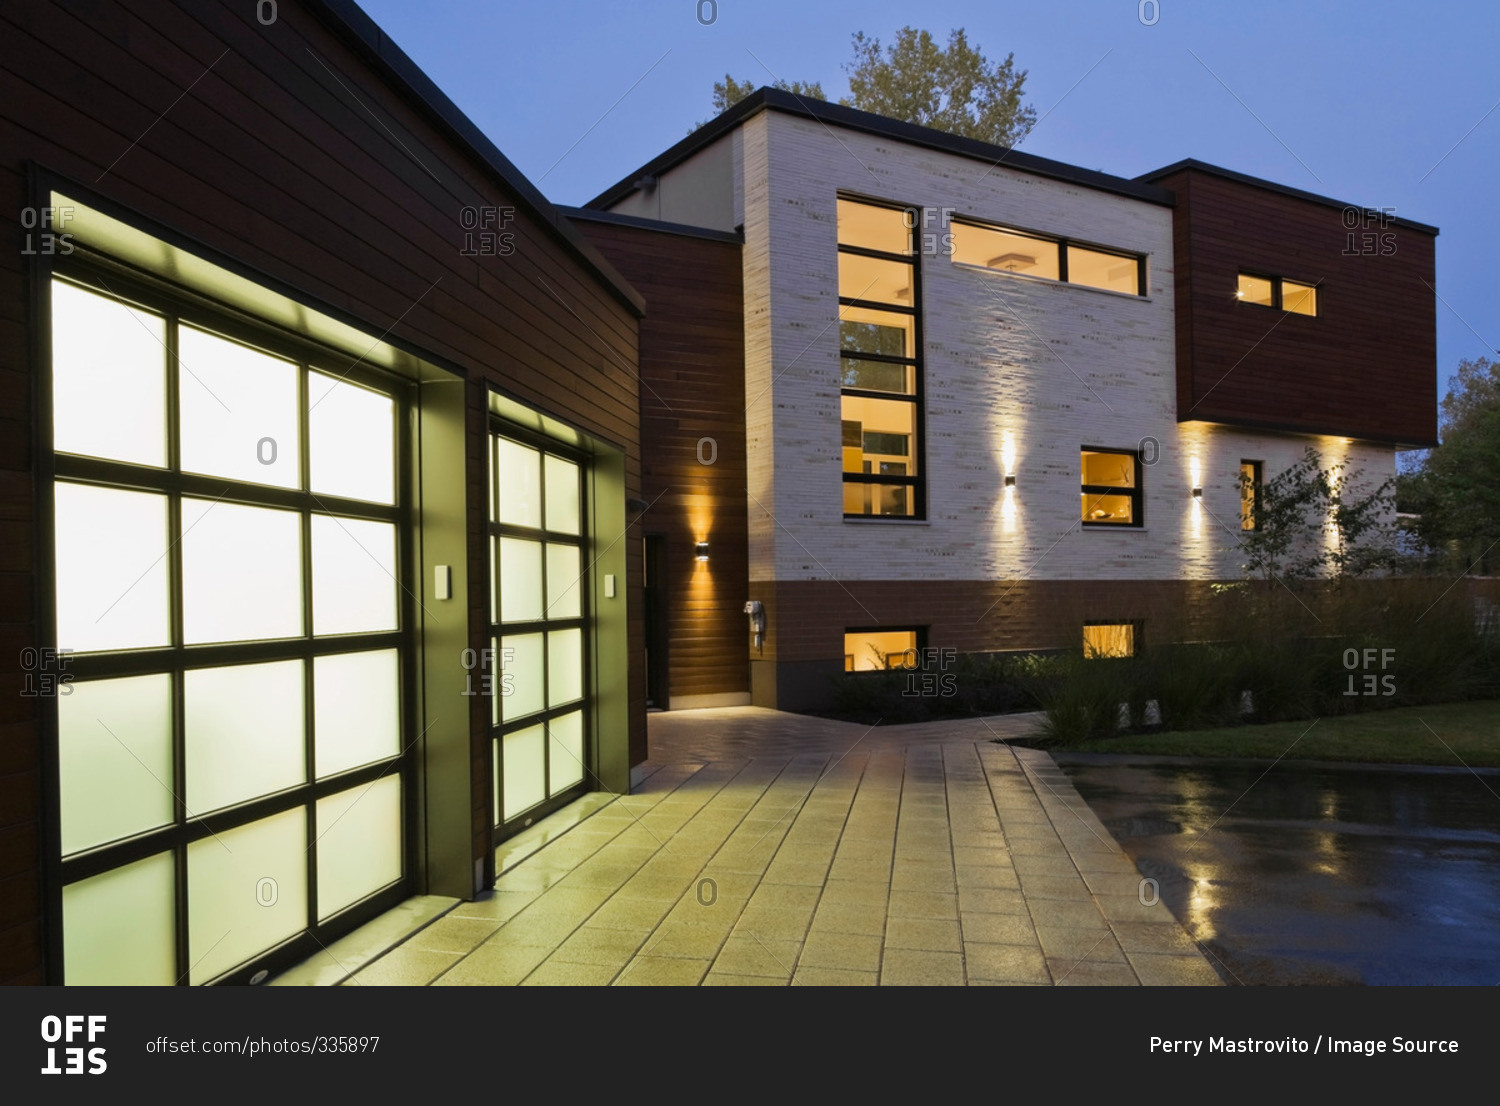 Illuminated two car garage of modern cubist style residential home at dusk, Quebec, Canada